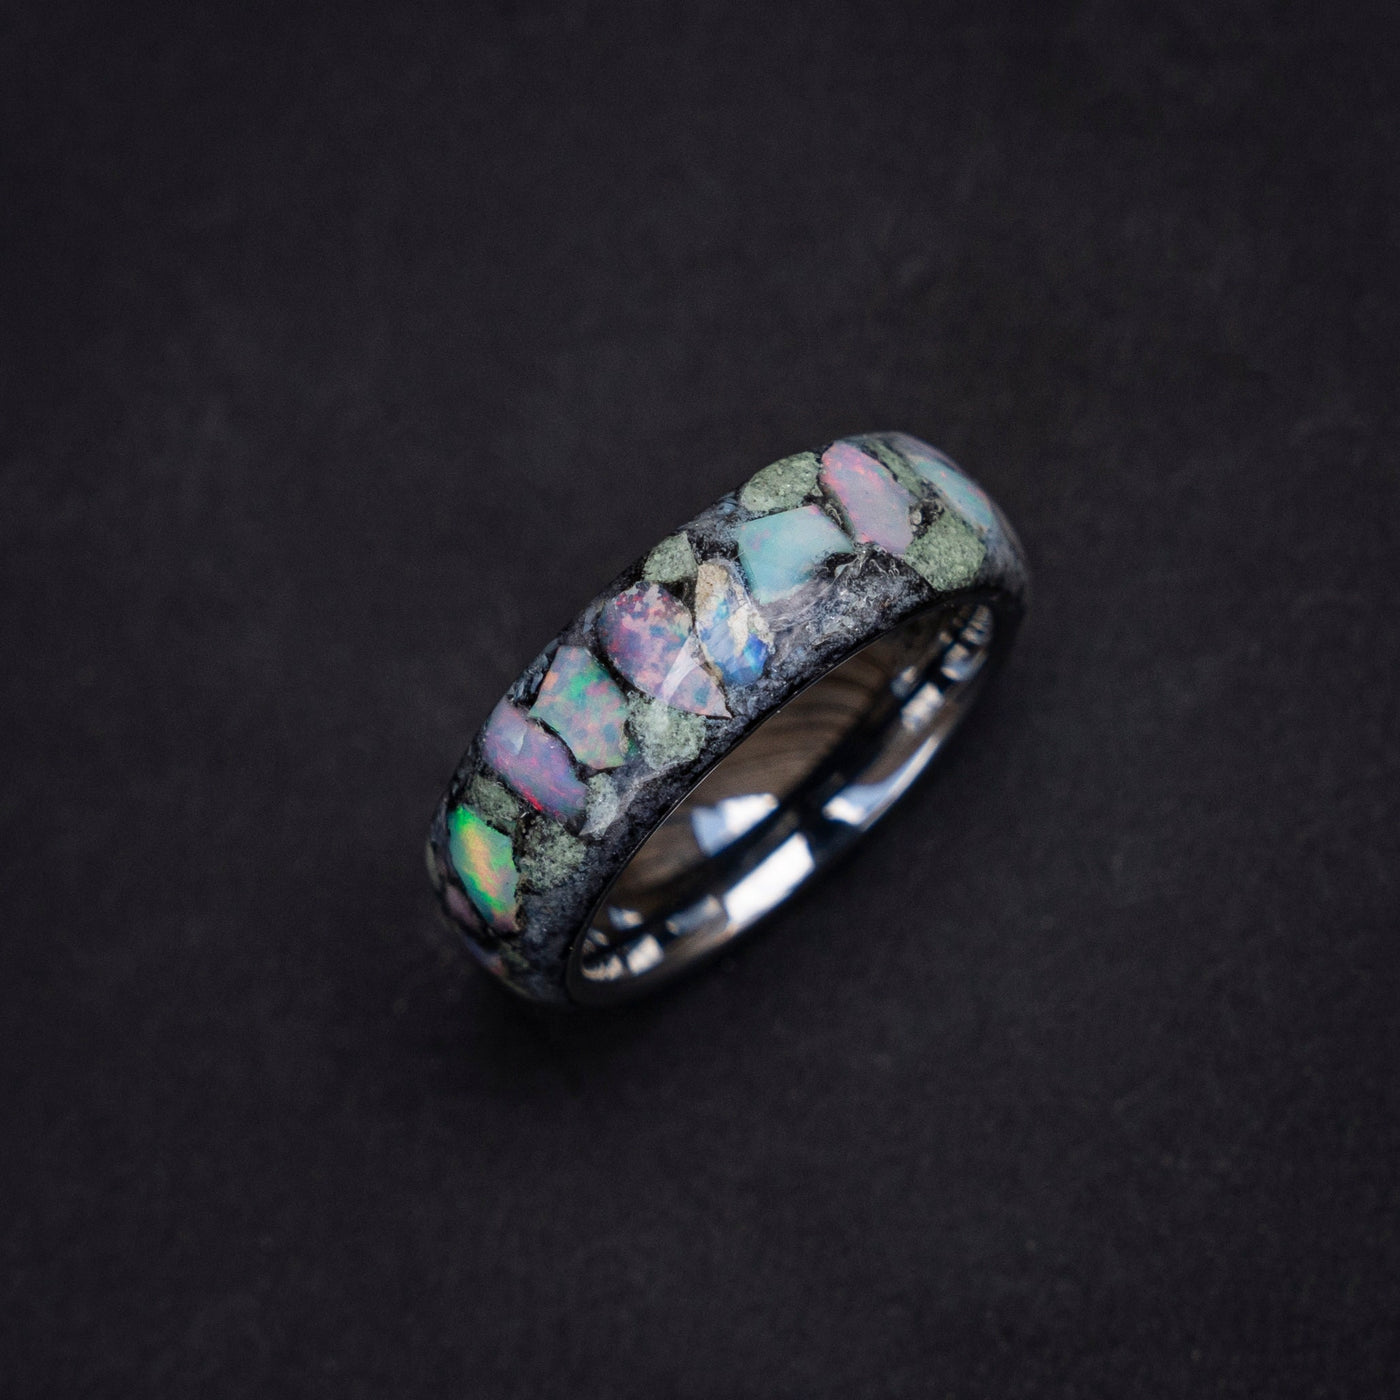 Ethiopian opal glow in the dark ring, glowstone ring, mens promise ring, Unique, Etiopian opal ring, tungsten engagement ring | Decazi - Decazi